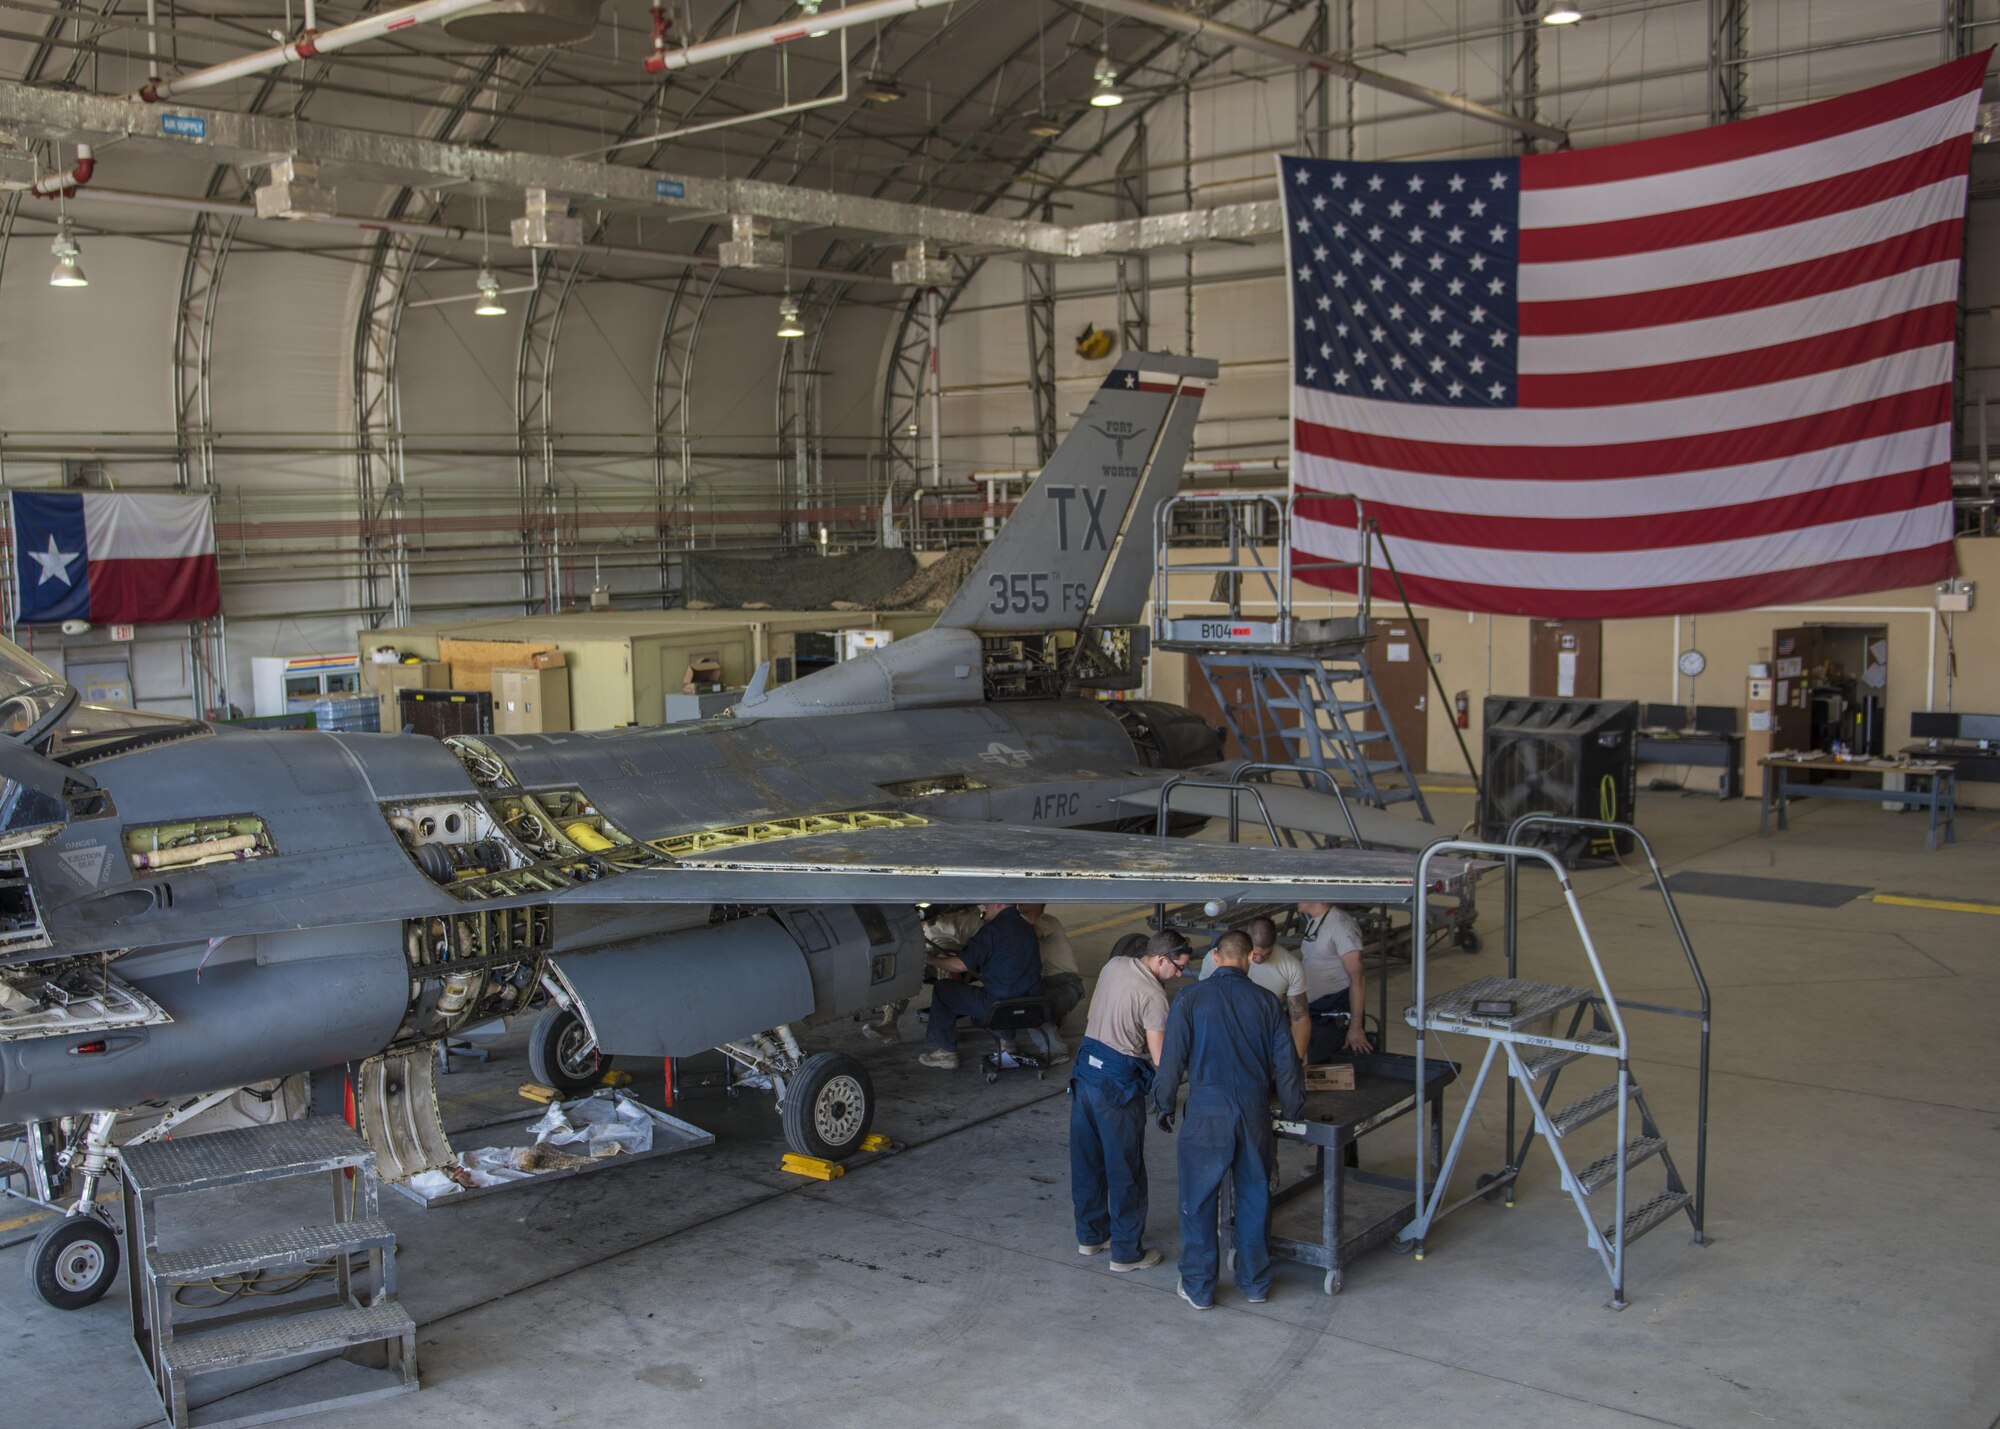 The 455th Expeditionary Maintenance Squadron Phase flight conducts a 300 hour inspection on an F-16C Fighting Falcon, Bagram Airfield, Afghanistan, Aug. 22, 2016. This aircraft is going through phase maintenance where members of the 455th EMXS phase flight closely inspect the aircraft for cracks and other types of damage, verifying that the 30 plus year old aircraft is safe to fly. (U.S. Air Force photo by Senior Airman Justyn M. Freeman)